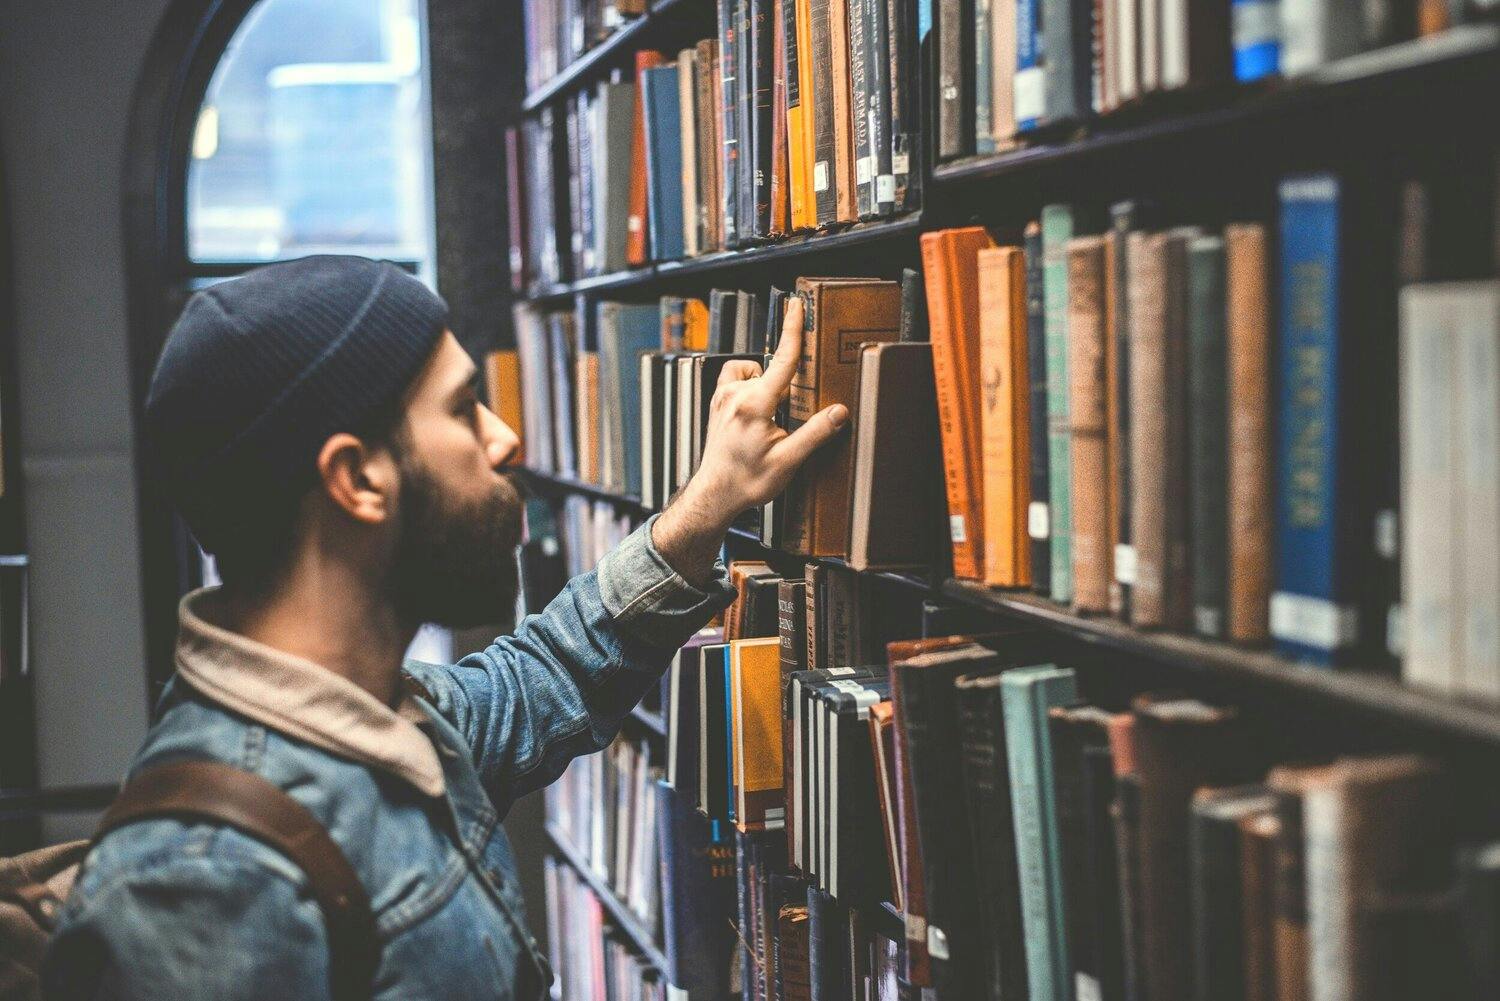 Bearded man in hat selects a book from a library shelf.